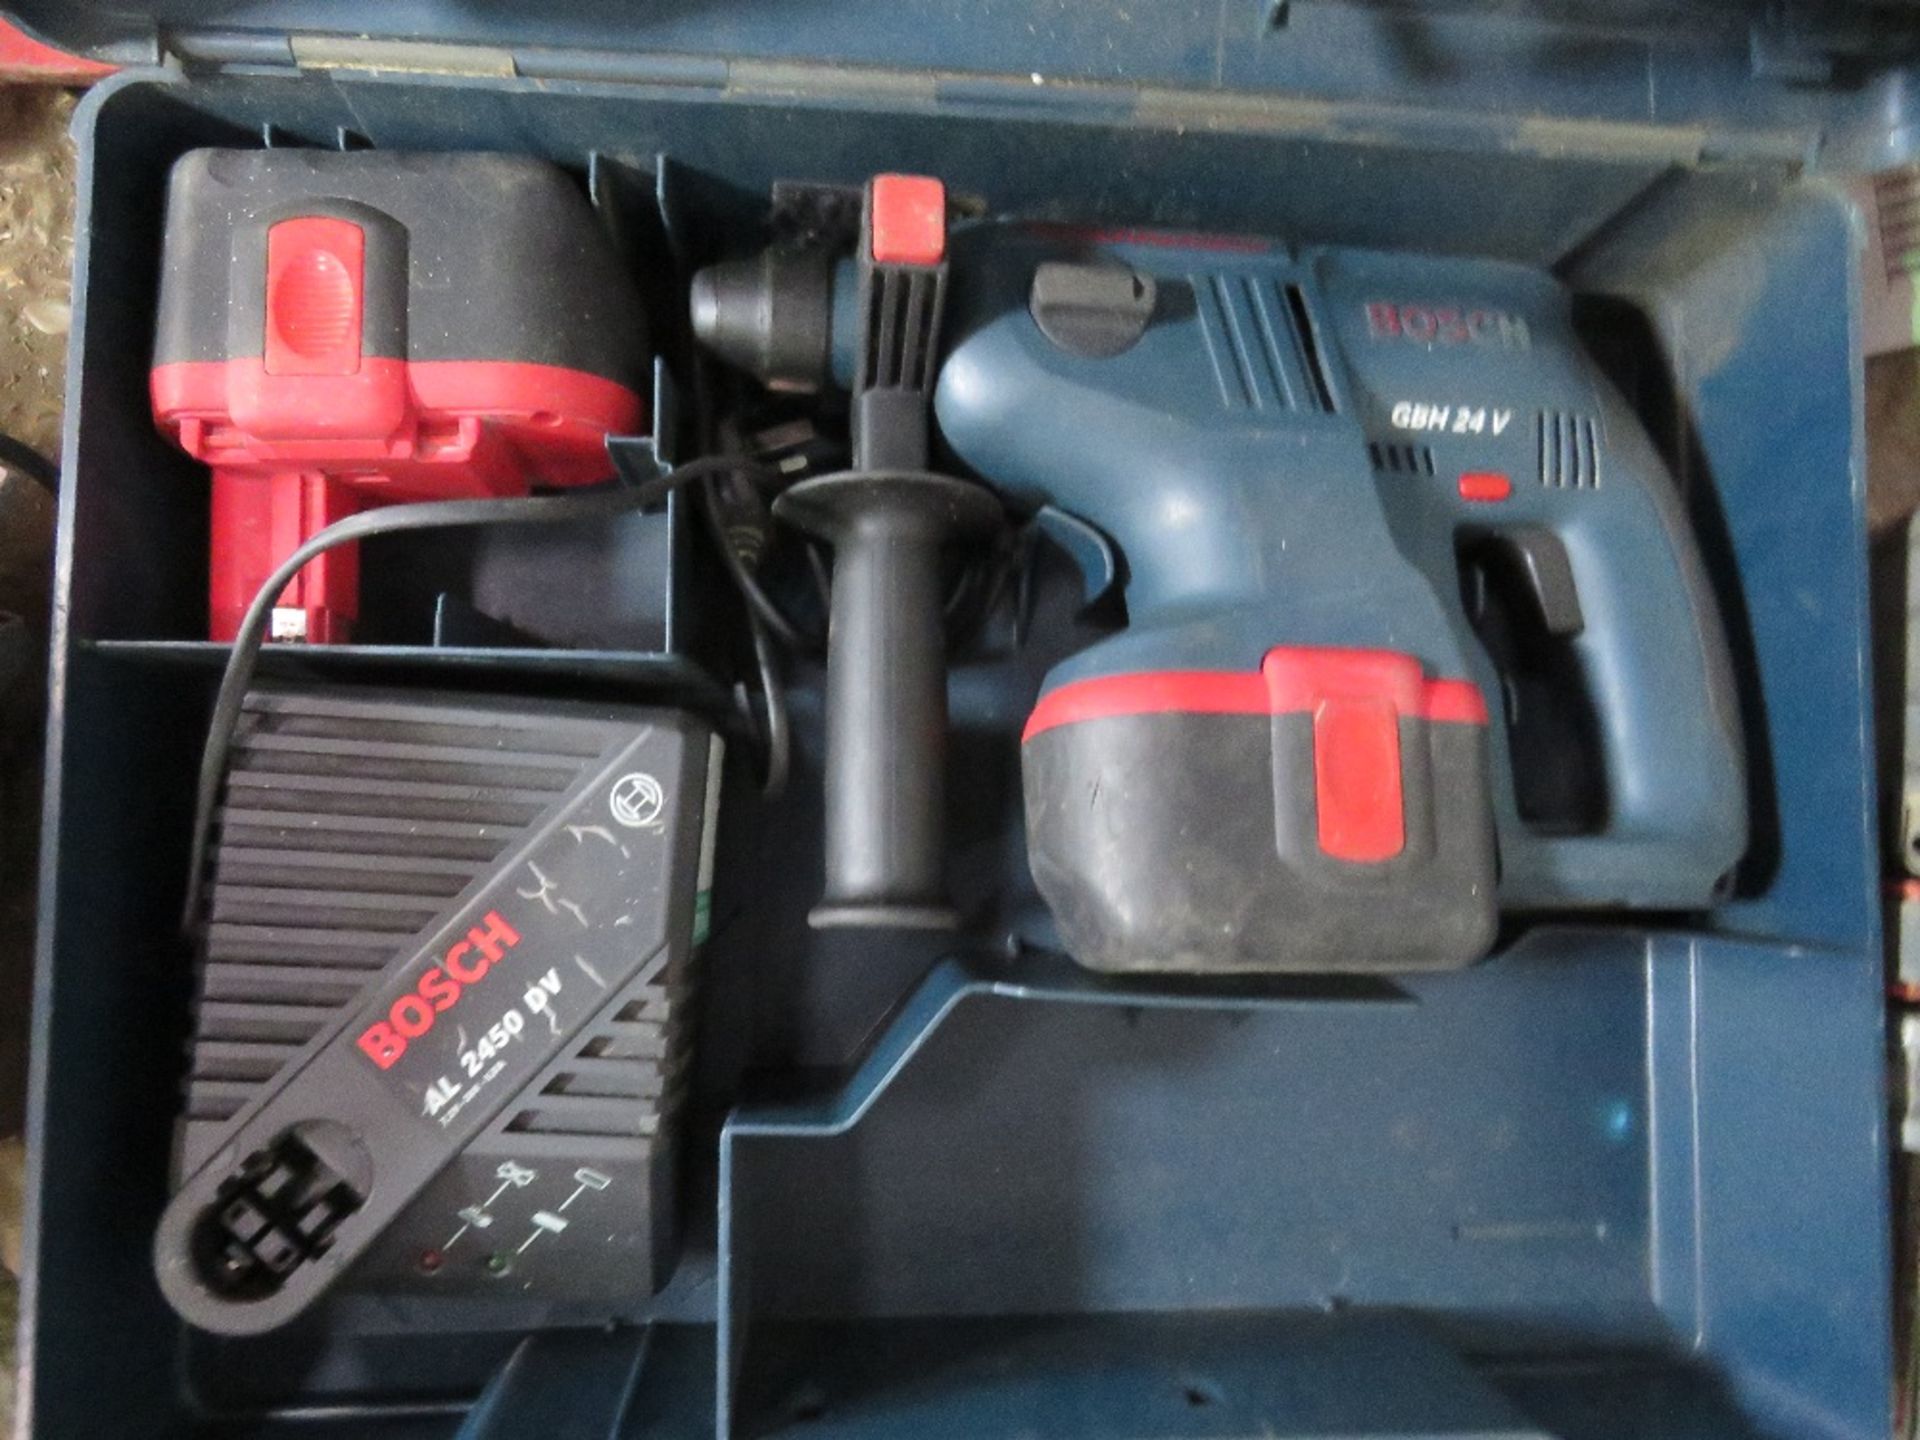 BOSCH GBH 24V BATTERY DRILL SOURCED FROM DEPOT CLEARANCE.